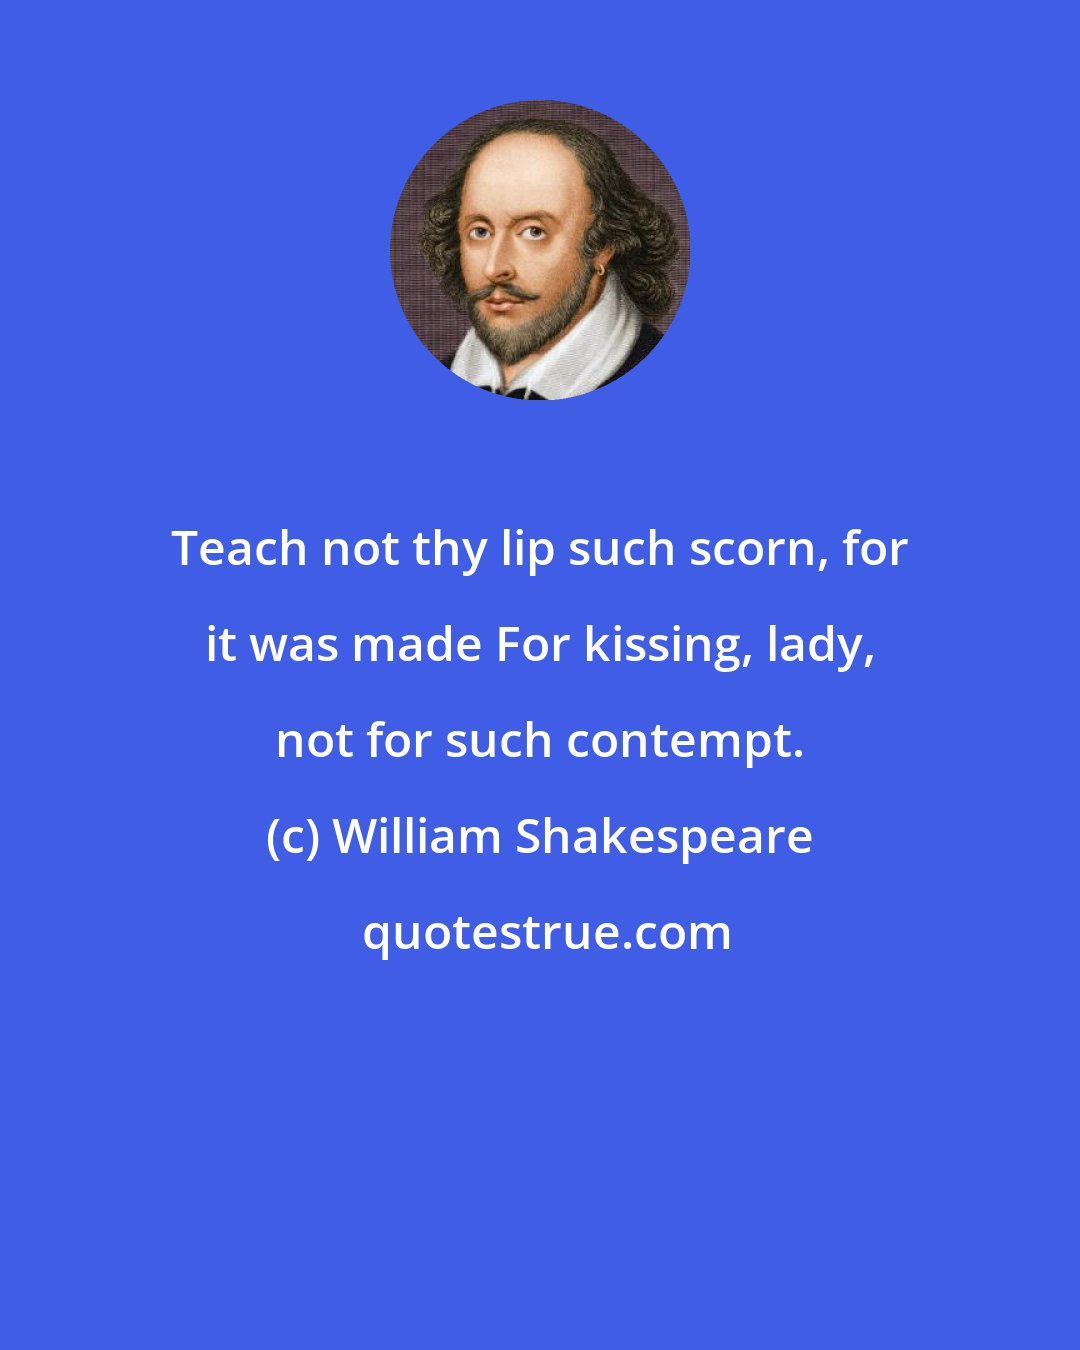 William Shakespeare: Teach not thy lip such scorn, for it was made For kissing, lady, not for such contempt.